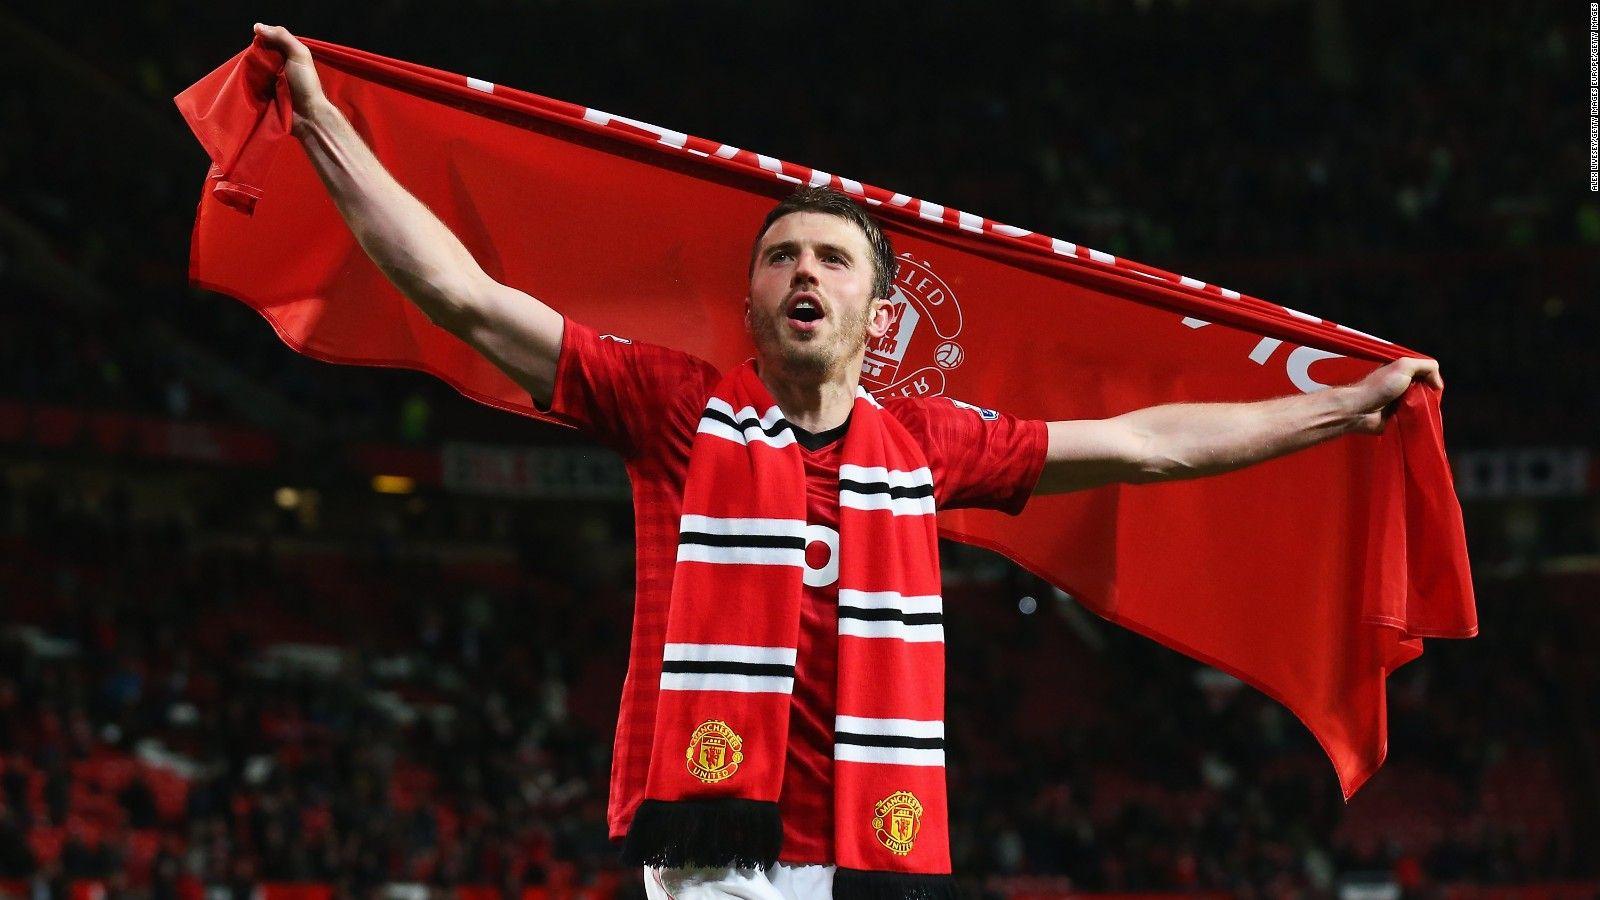 Manchester United: Michael Carrick - 'We have to be challenging